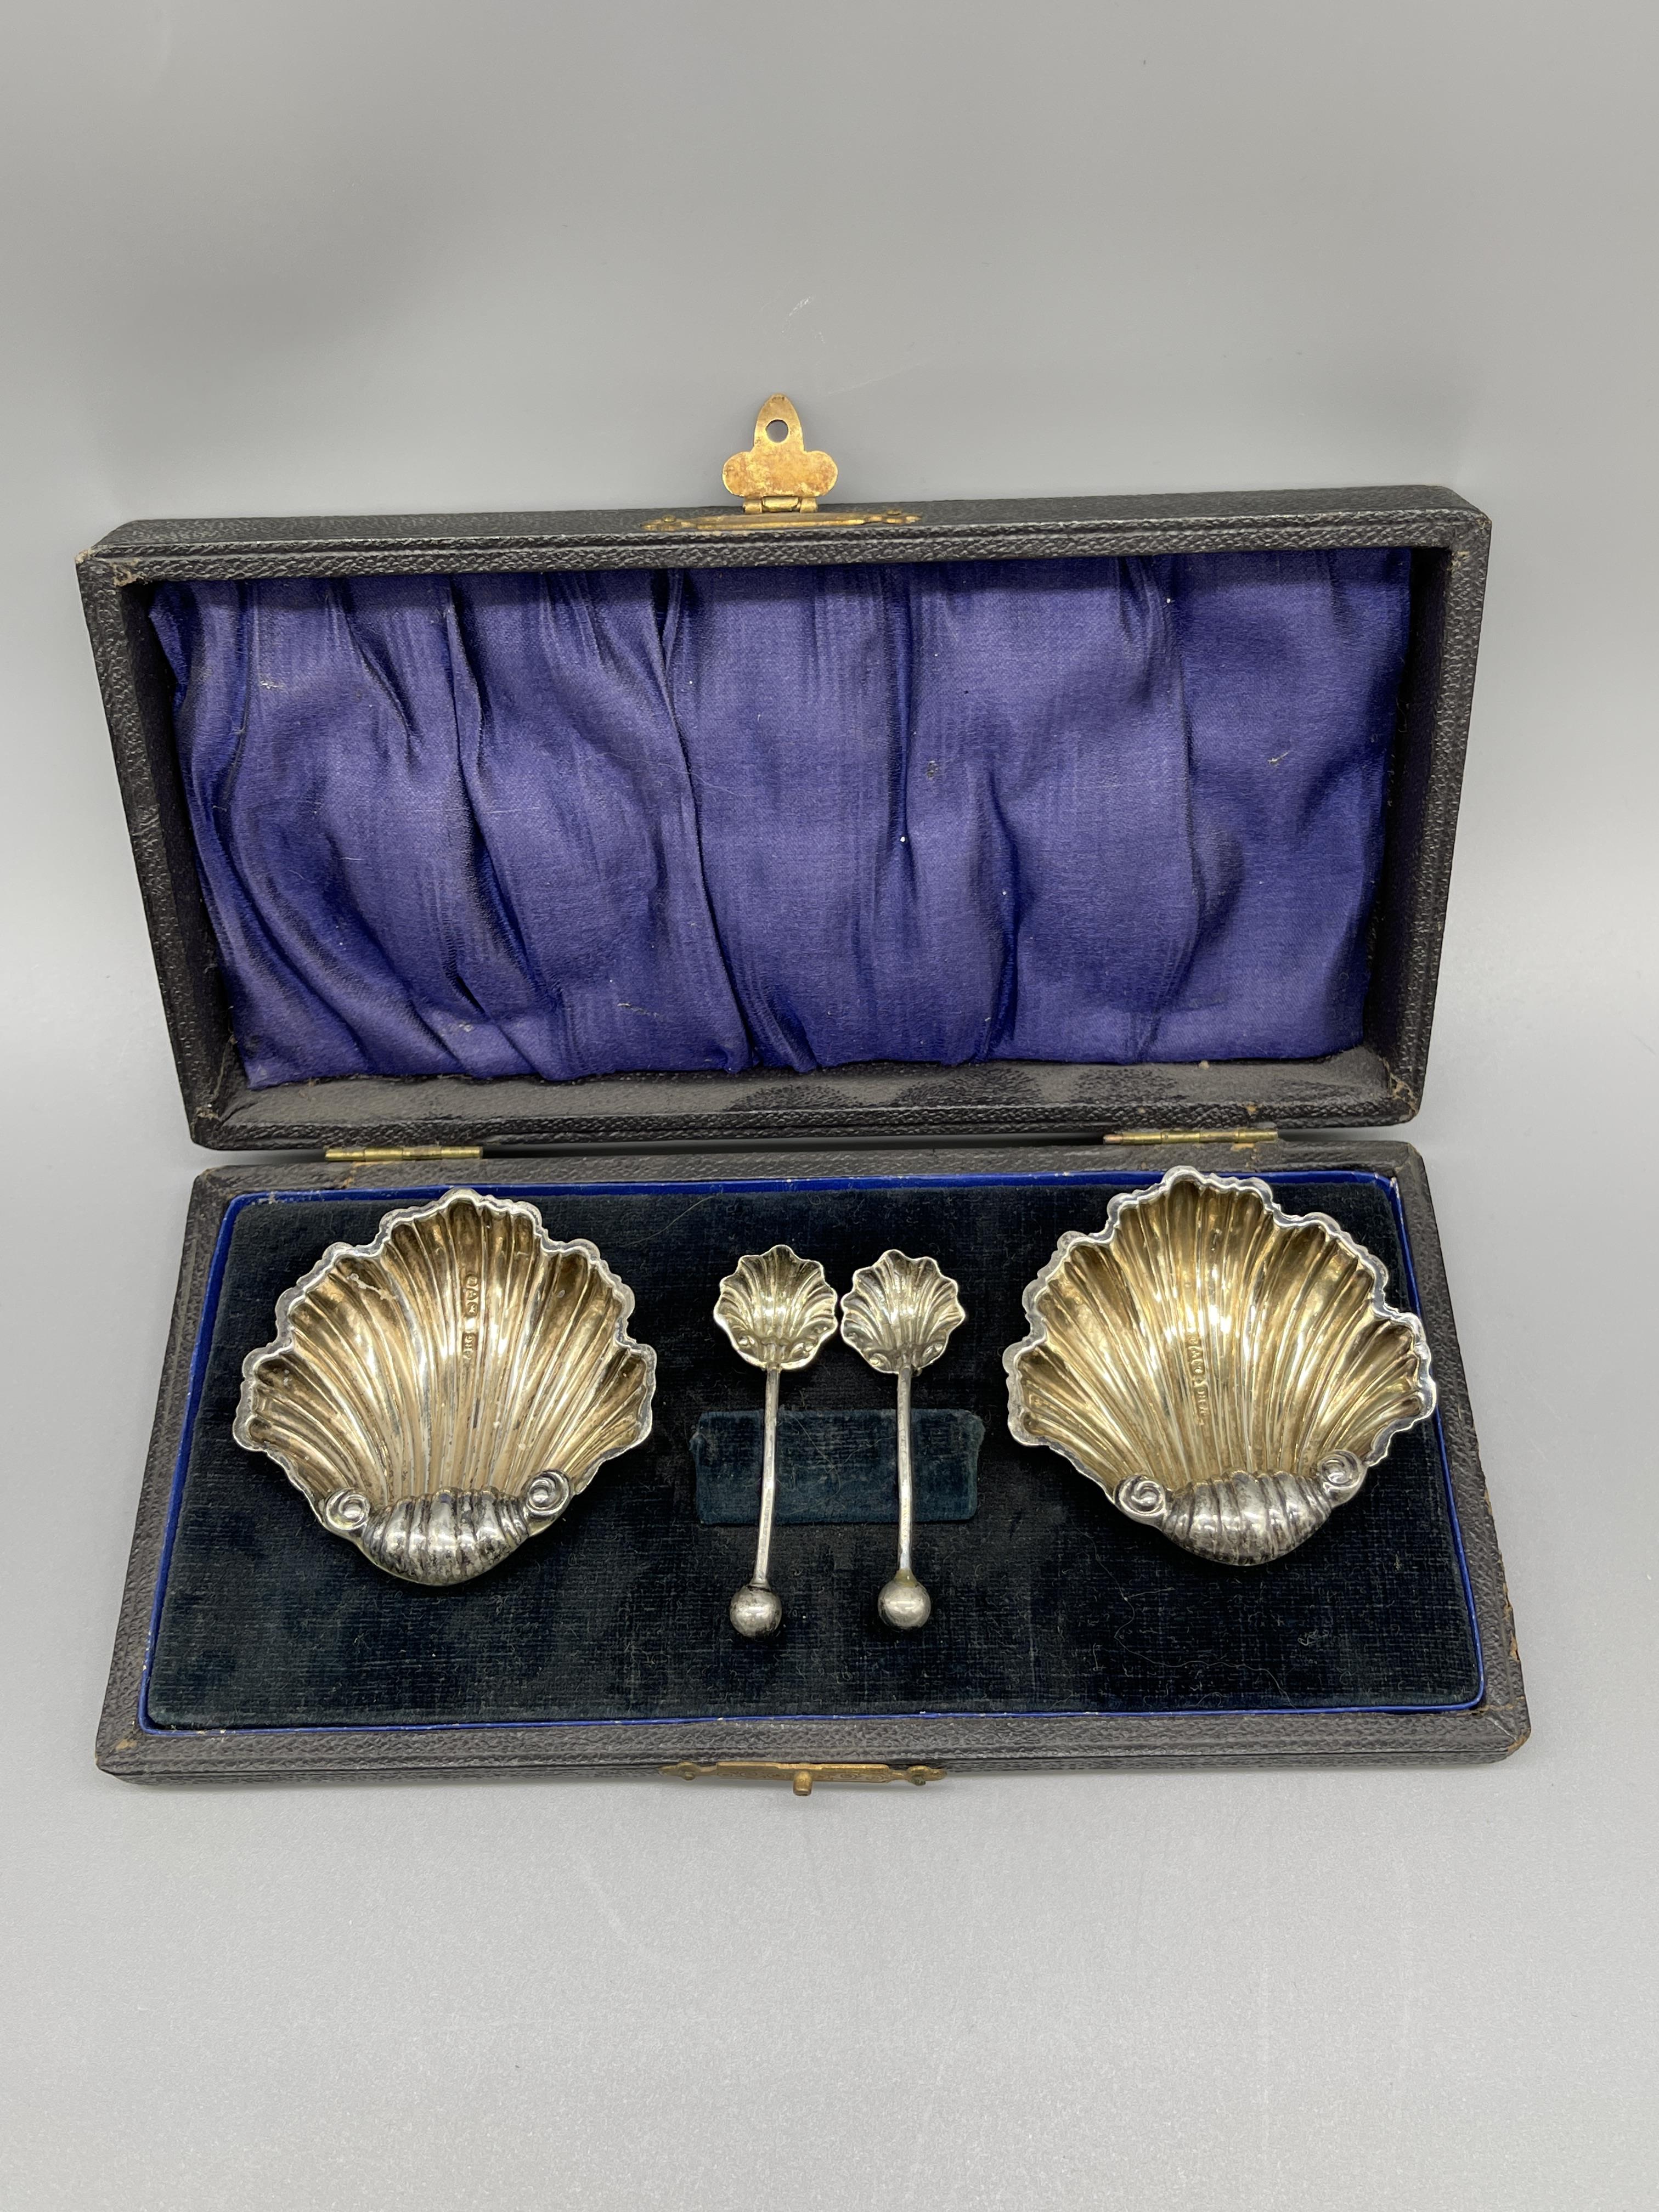 HM Silver cased shell salts and spoons.20G